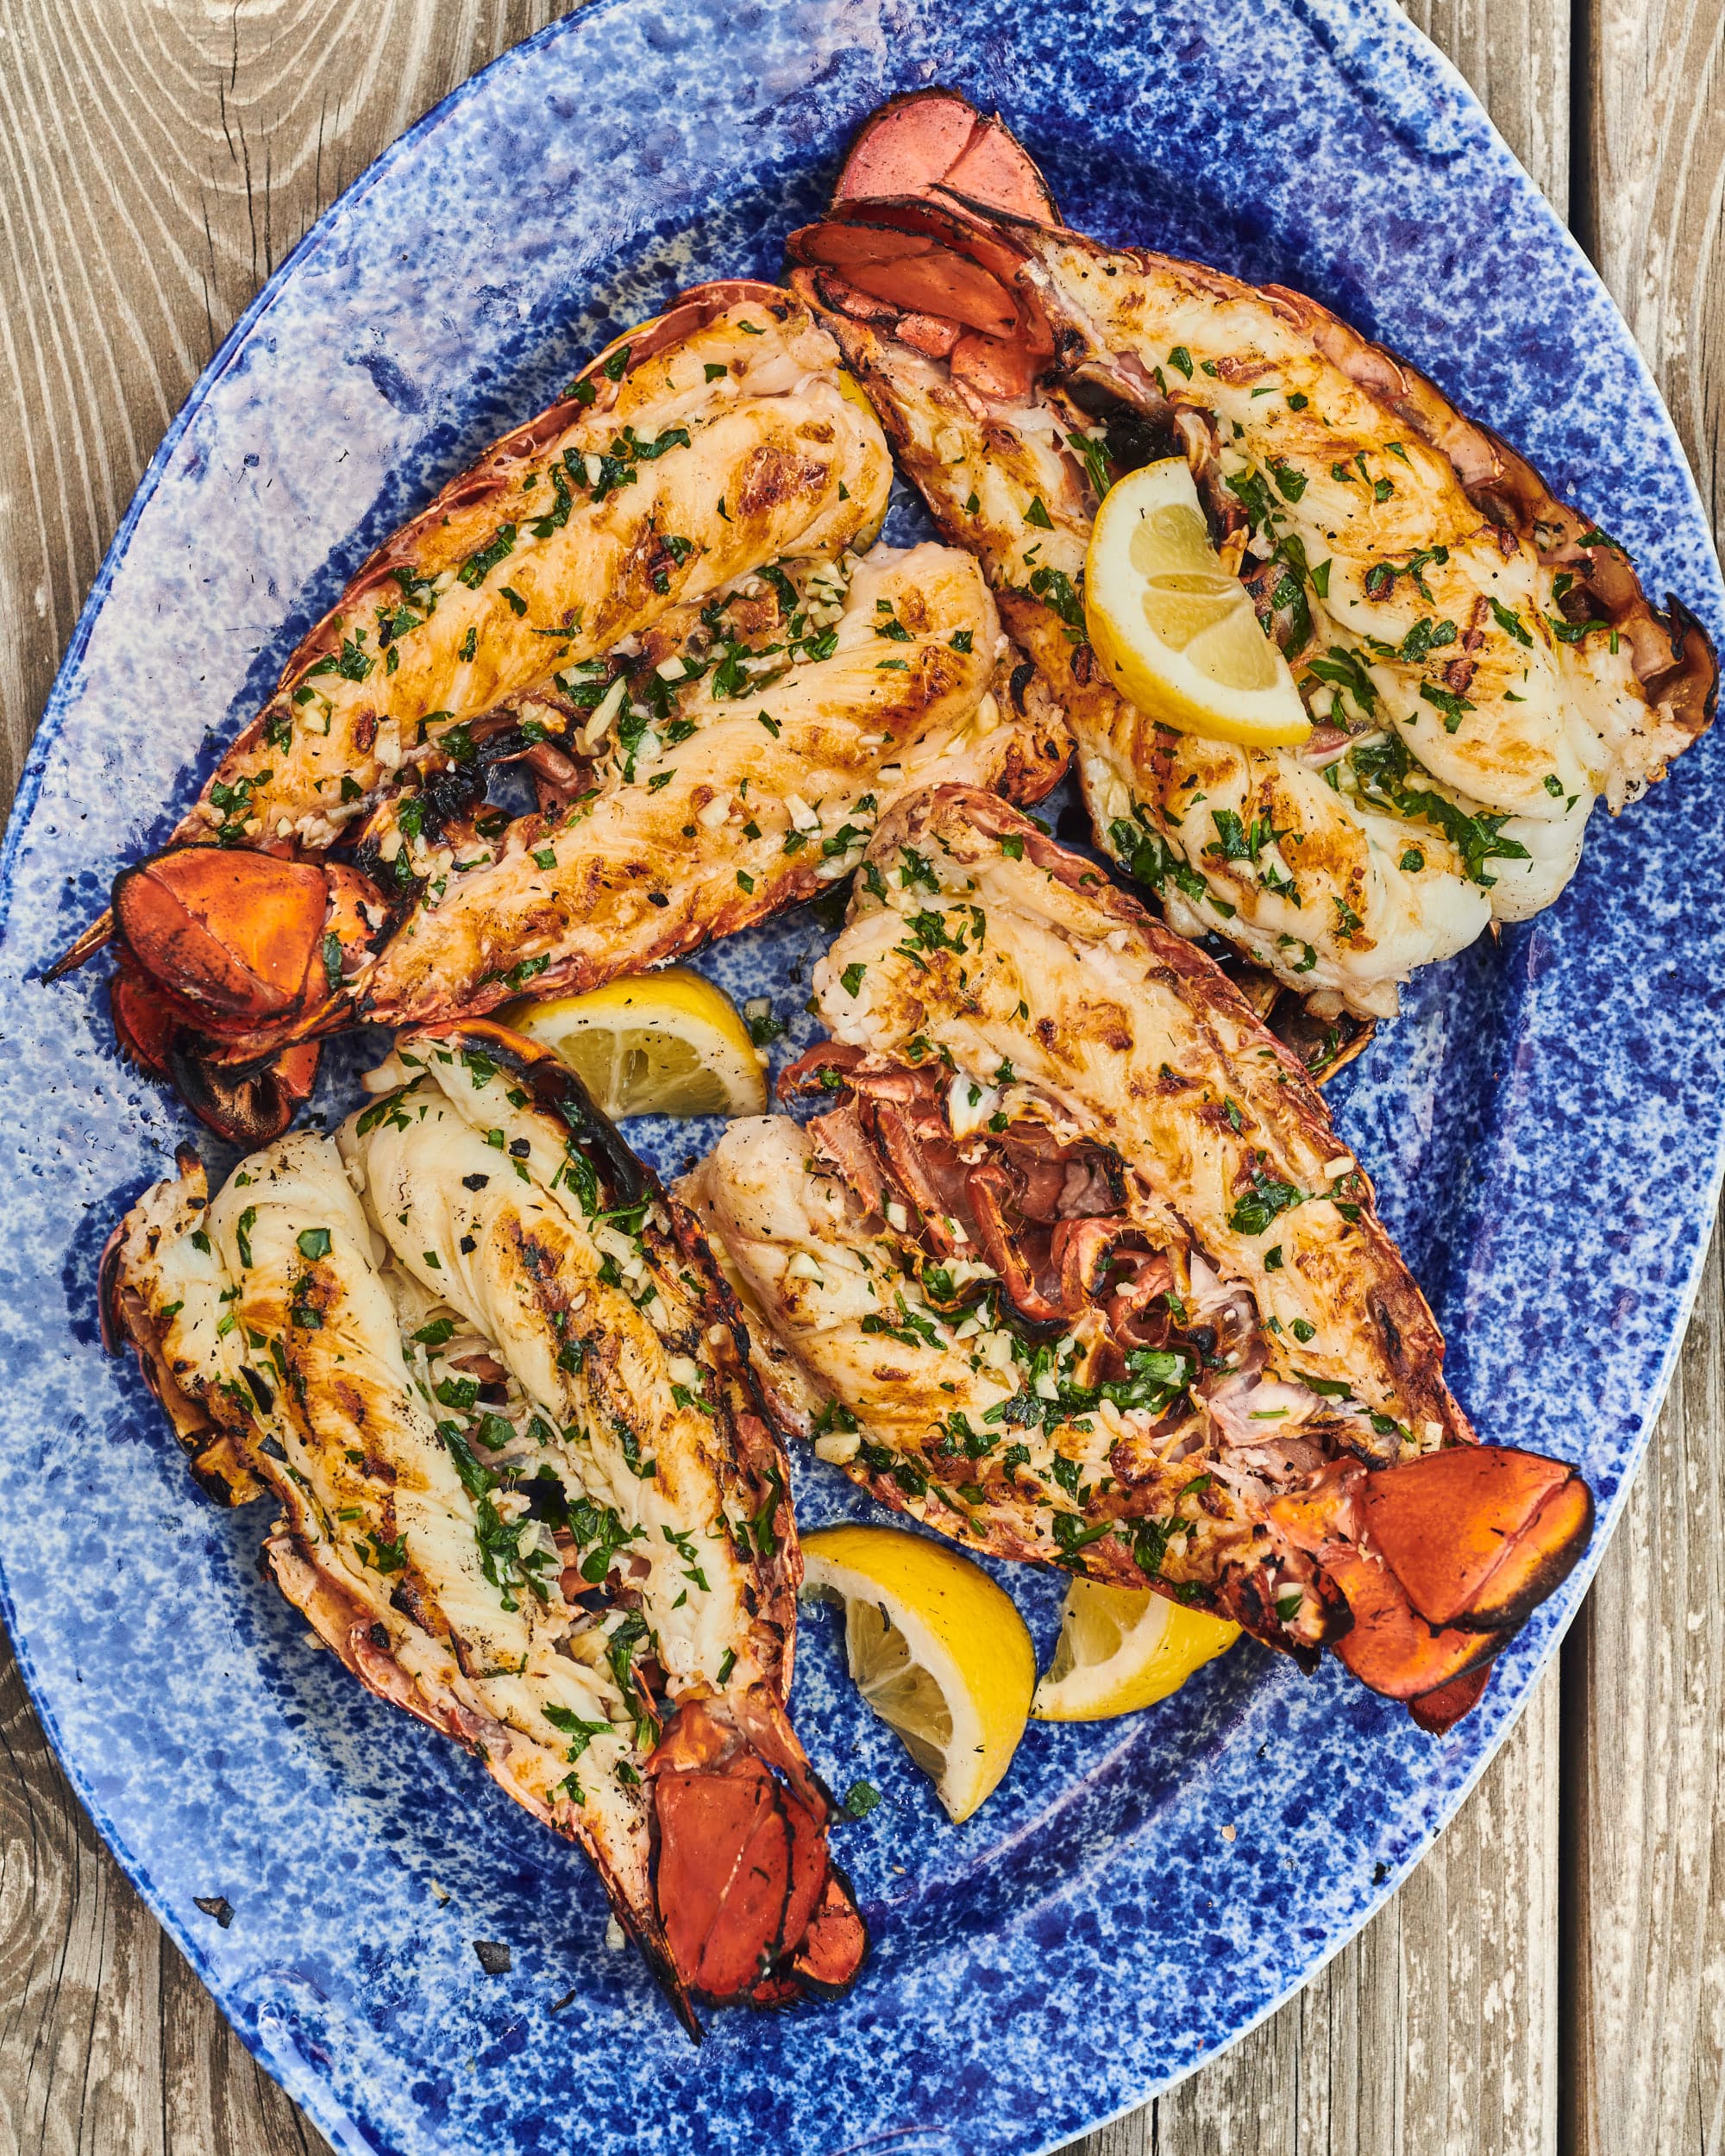 Grilled Lobster Tail With Garlic Butter Recipe The Kitchn | SexiezPicz ...